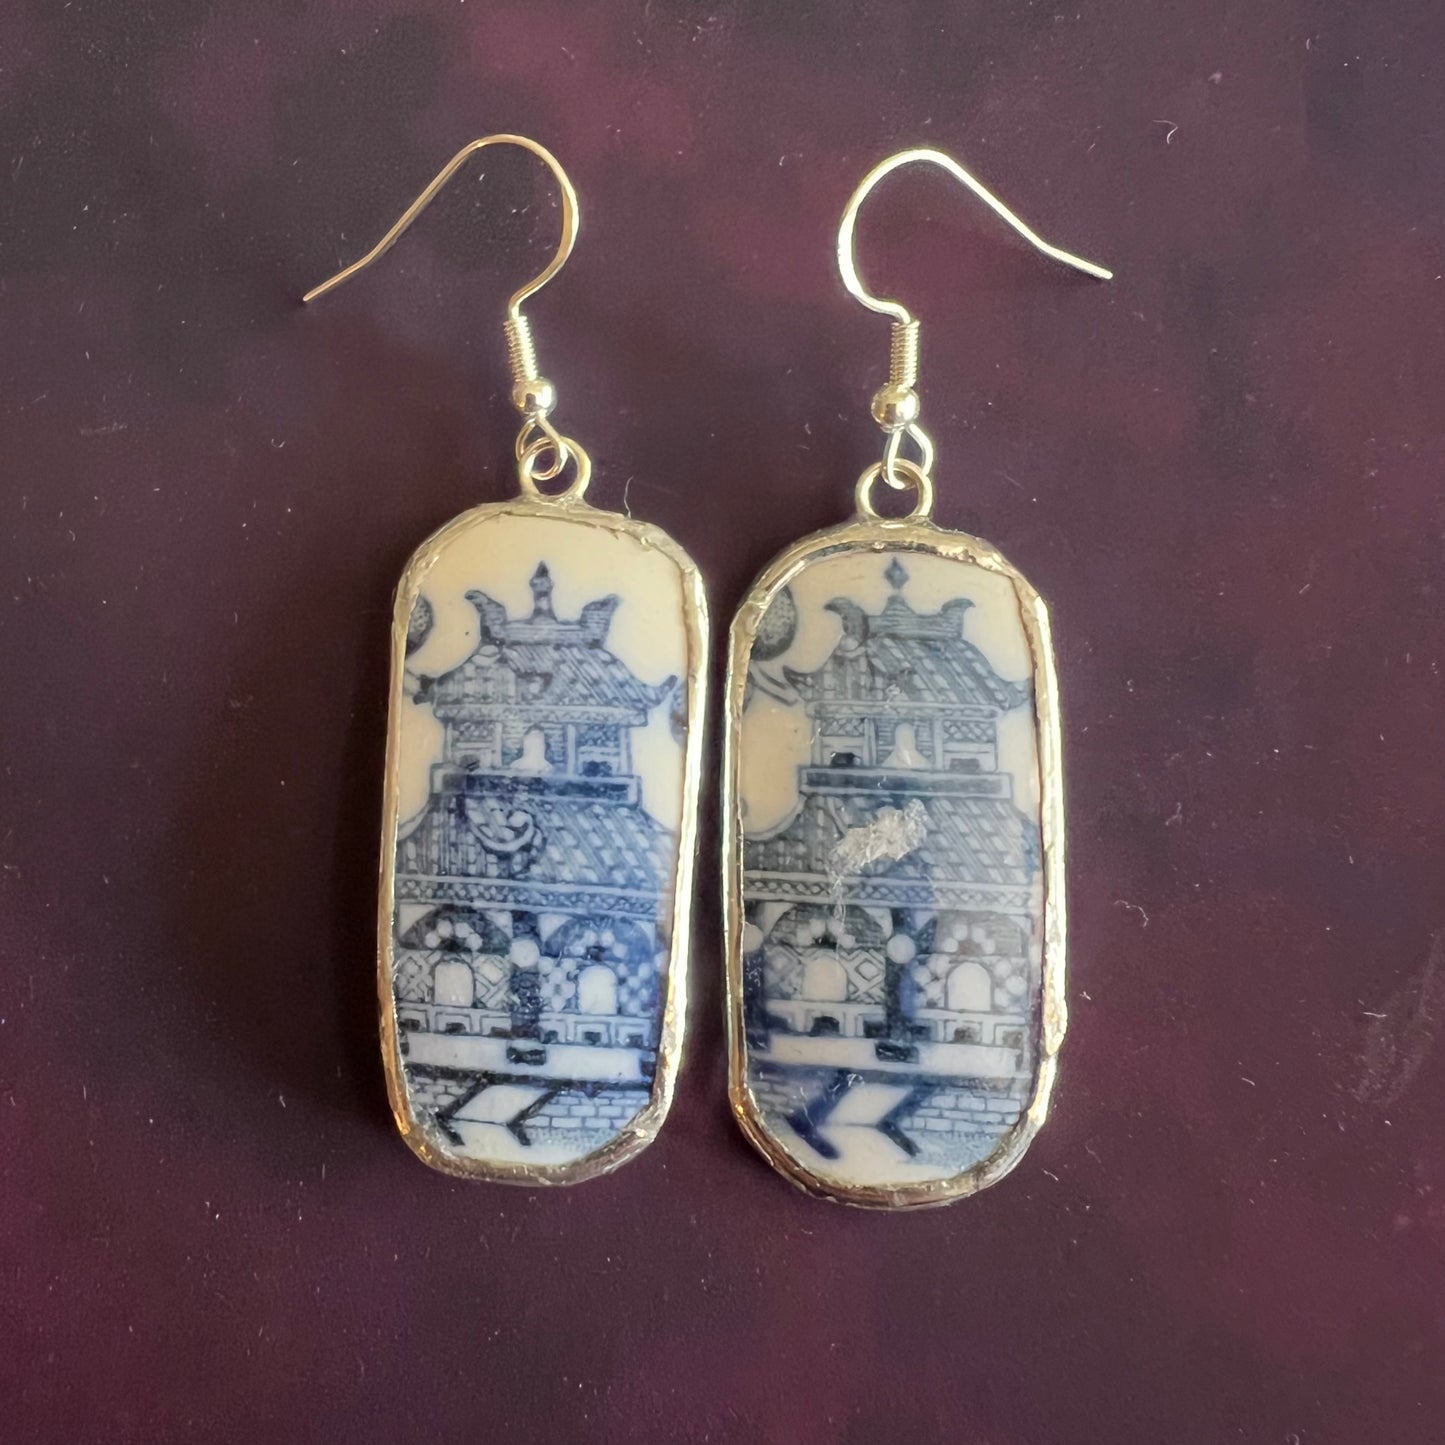 Vintage China Earrings Pagoda Willow Pattern